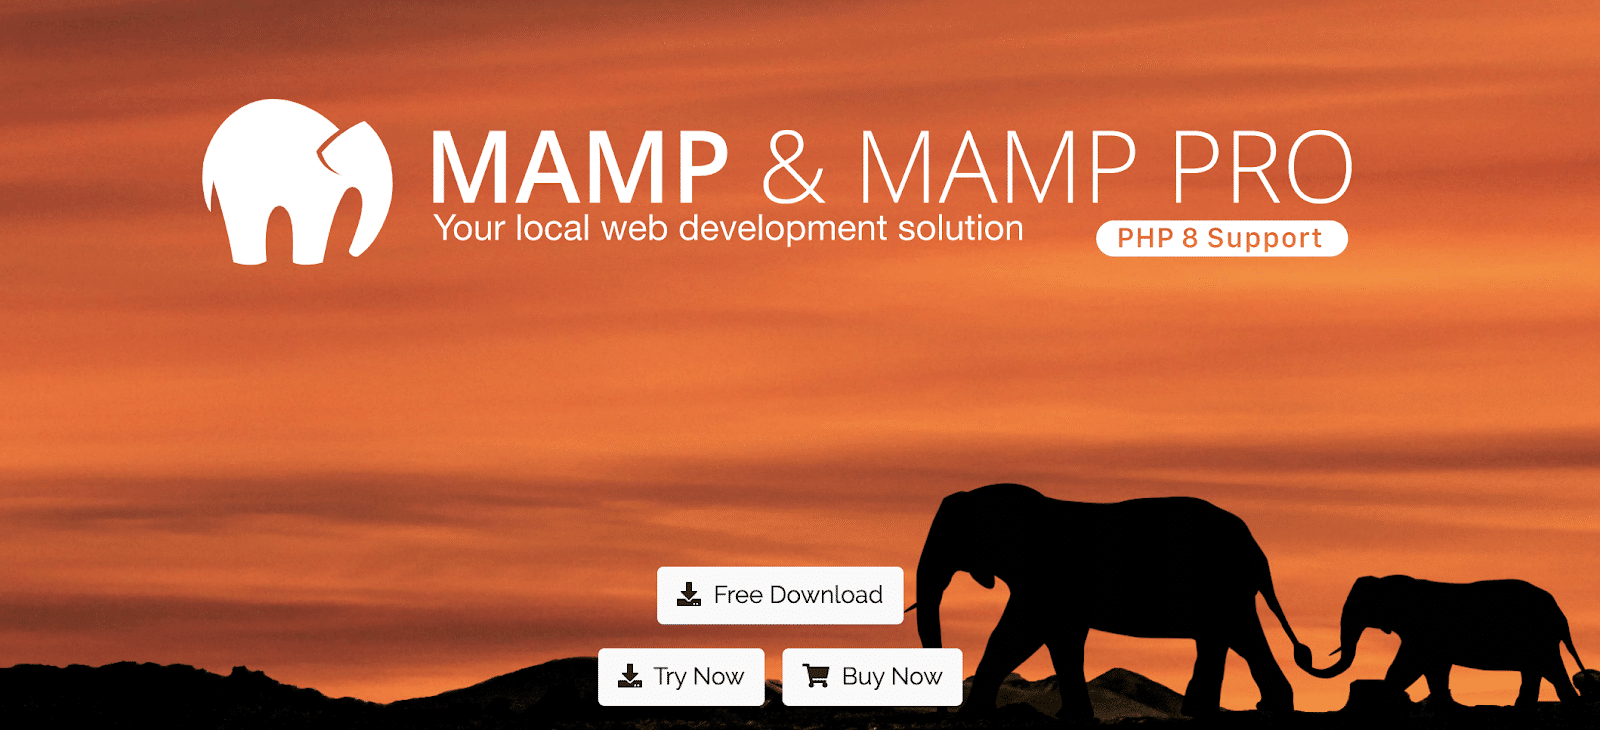 The MAMP home page